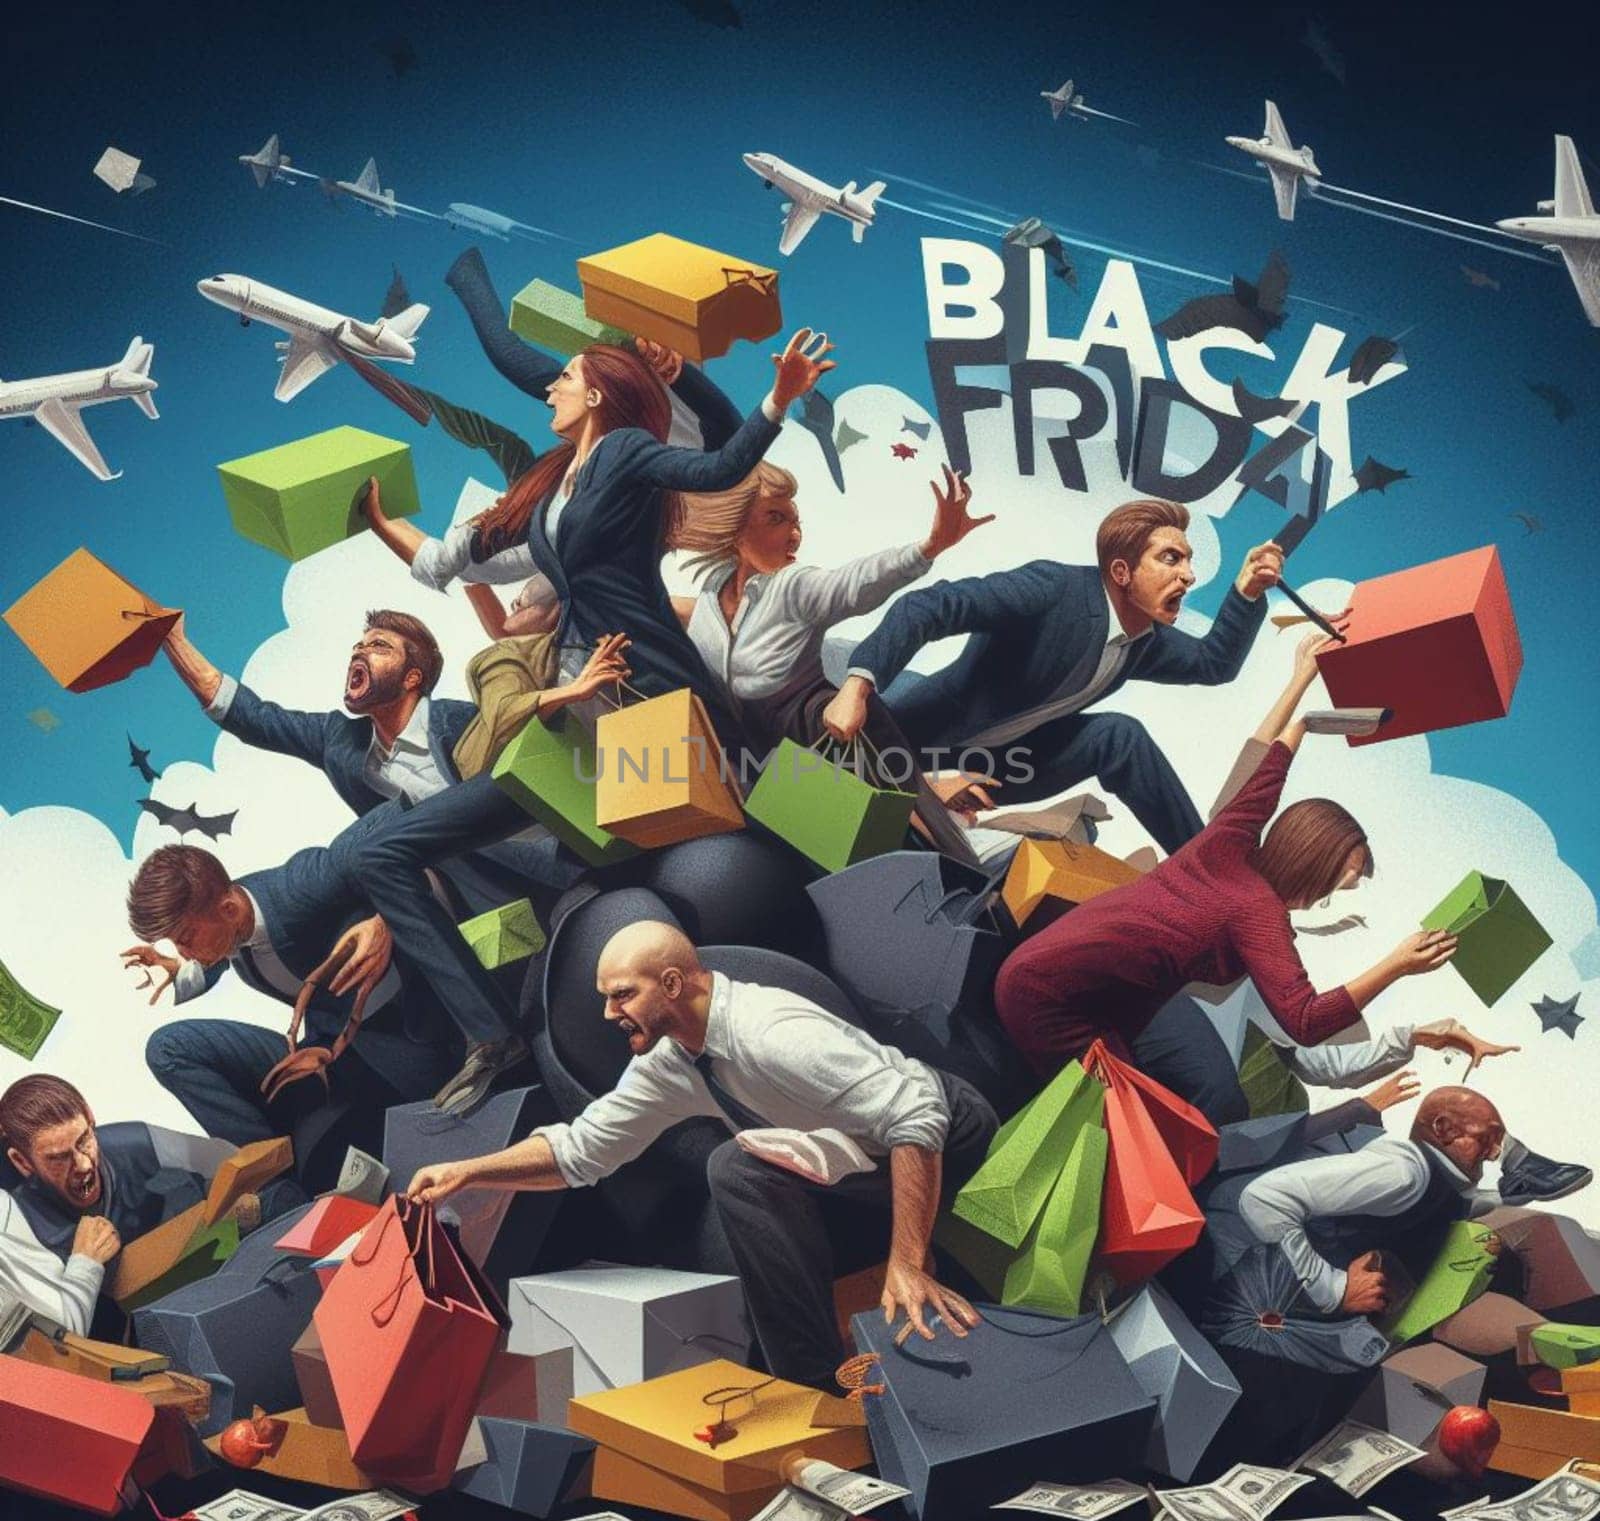 Surreal scene of people and objects in chaos to grab black friday offers at launch click day by verbano